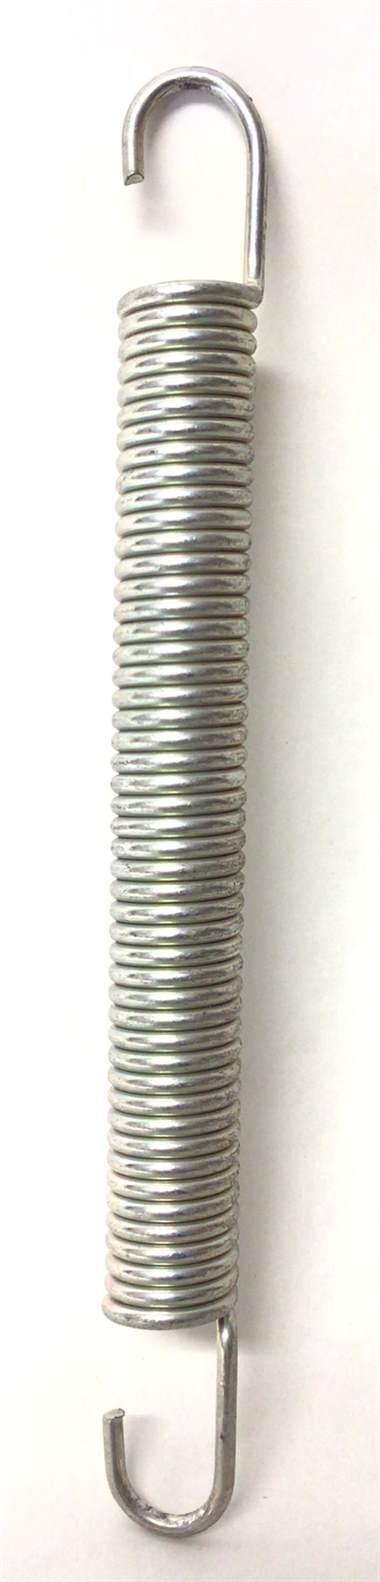 Large Tension Spring (Used)